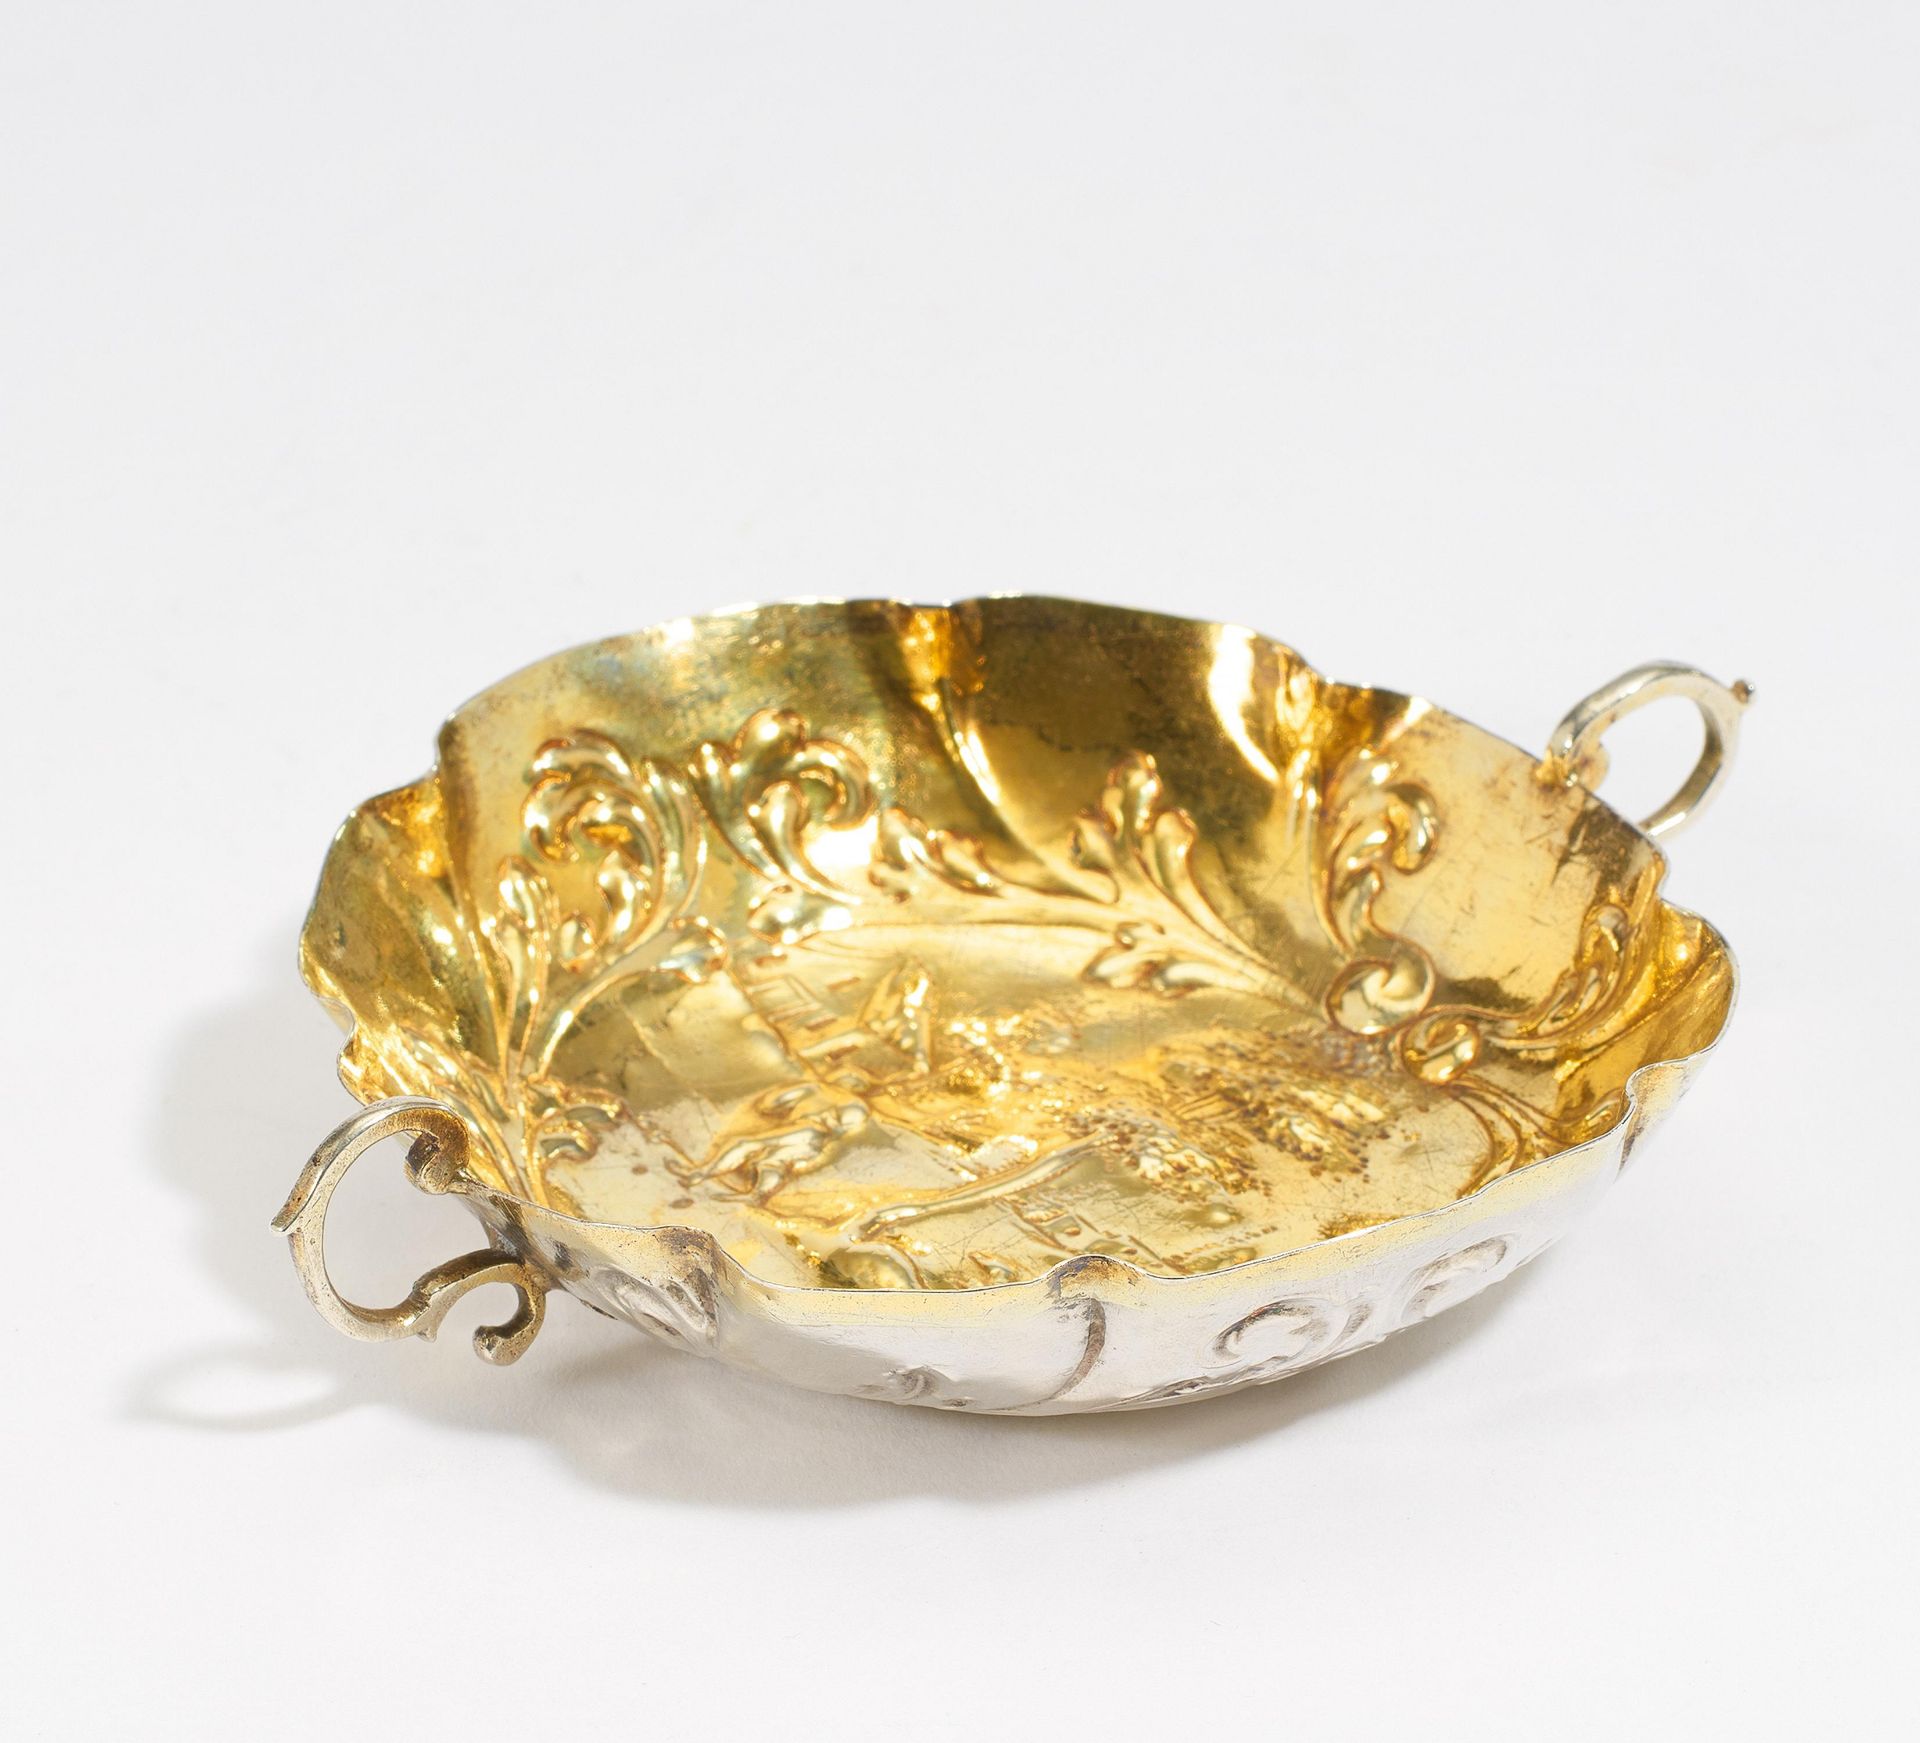 SILVER BRANDY BOWL WITH LANDSCAPE DEPICTION AND GOLD-PLATED INSIDE. Augsburg. Presumably 1695-99.